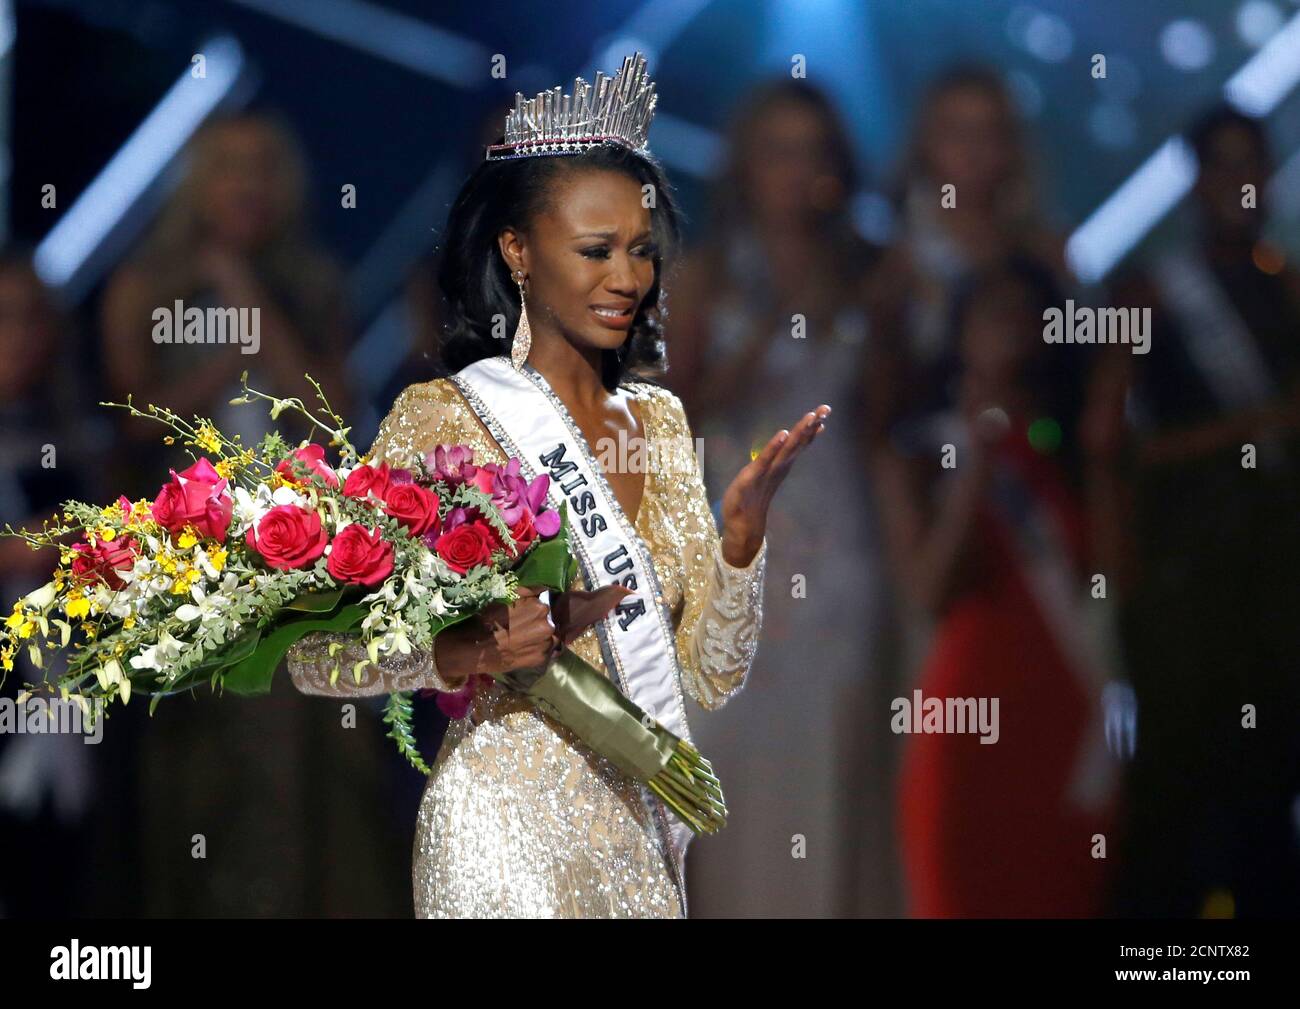 Miss District of Columbia Deshauna Barber reacts after being crowned Miss USA 2016 during the 2016 Miss USA pageant at the T-Mobile Arena in Las Vegas, Nevada, U.S., June 5, 2016. REUTERS/Steve Marcus Stock Photo